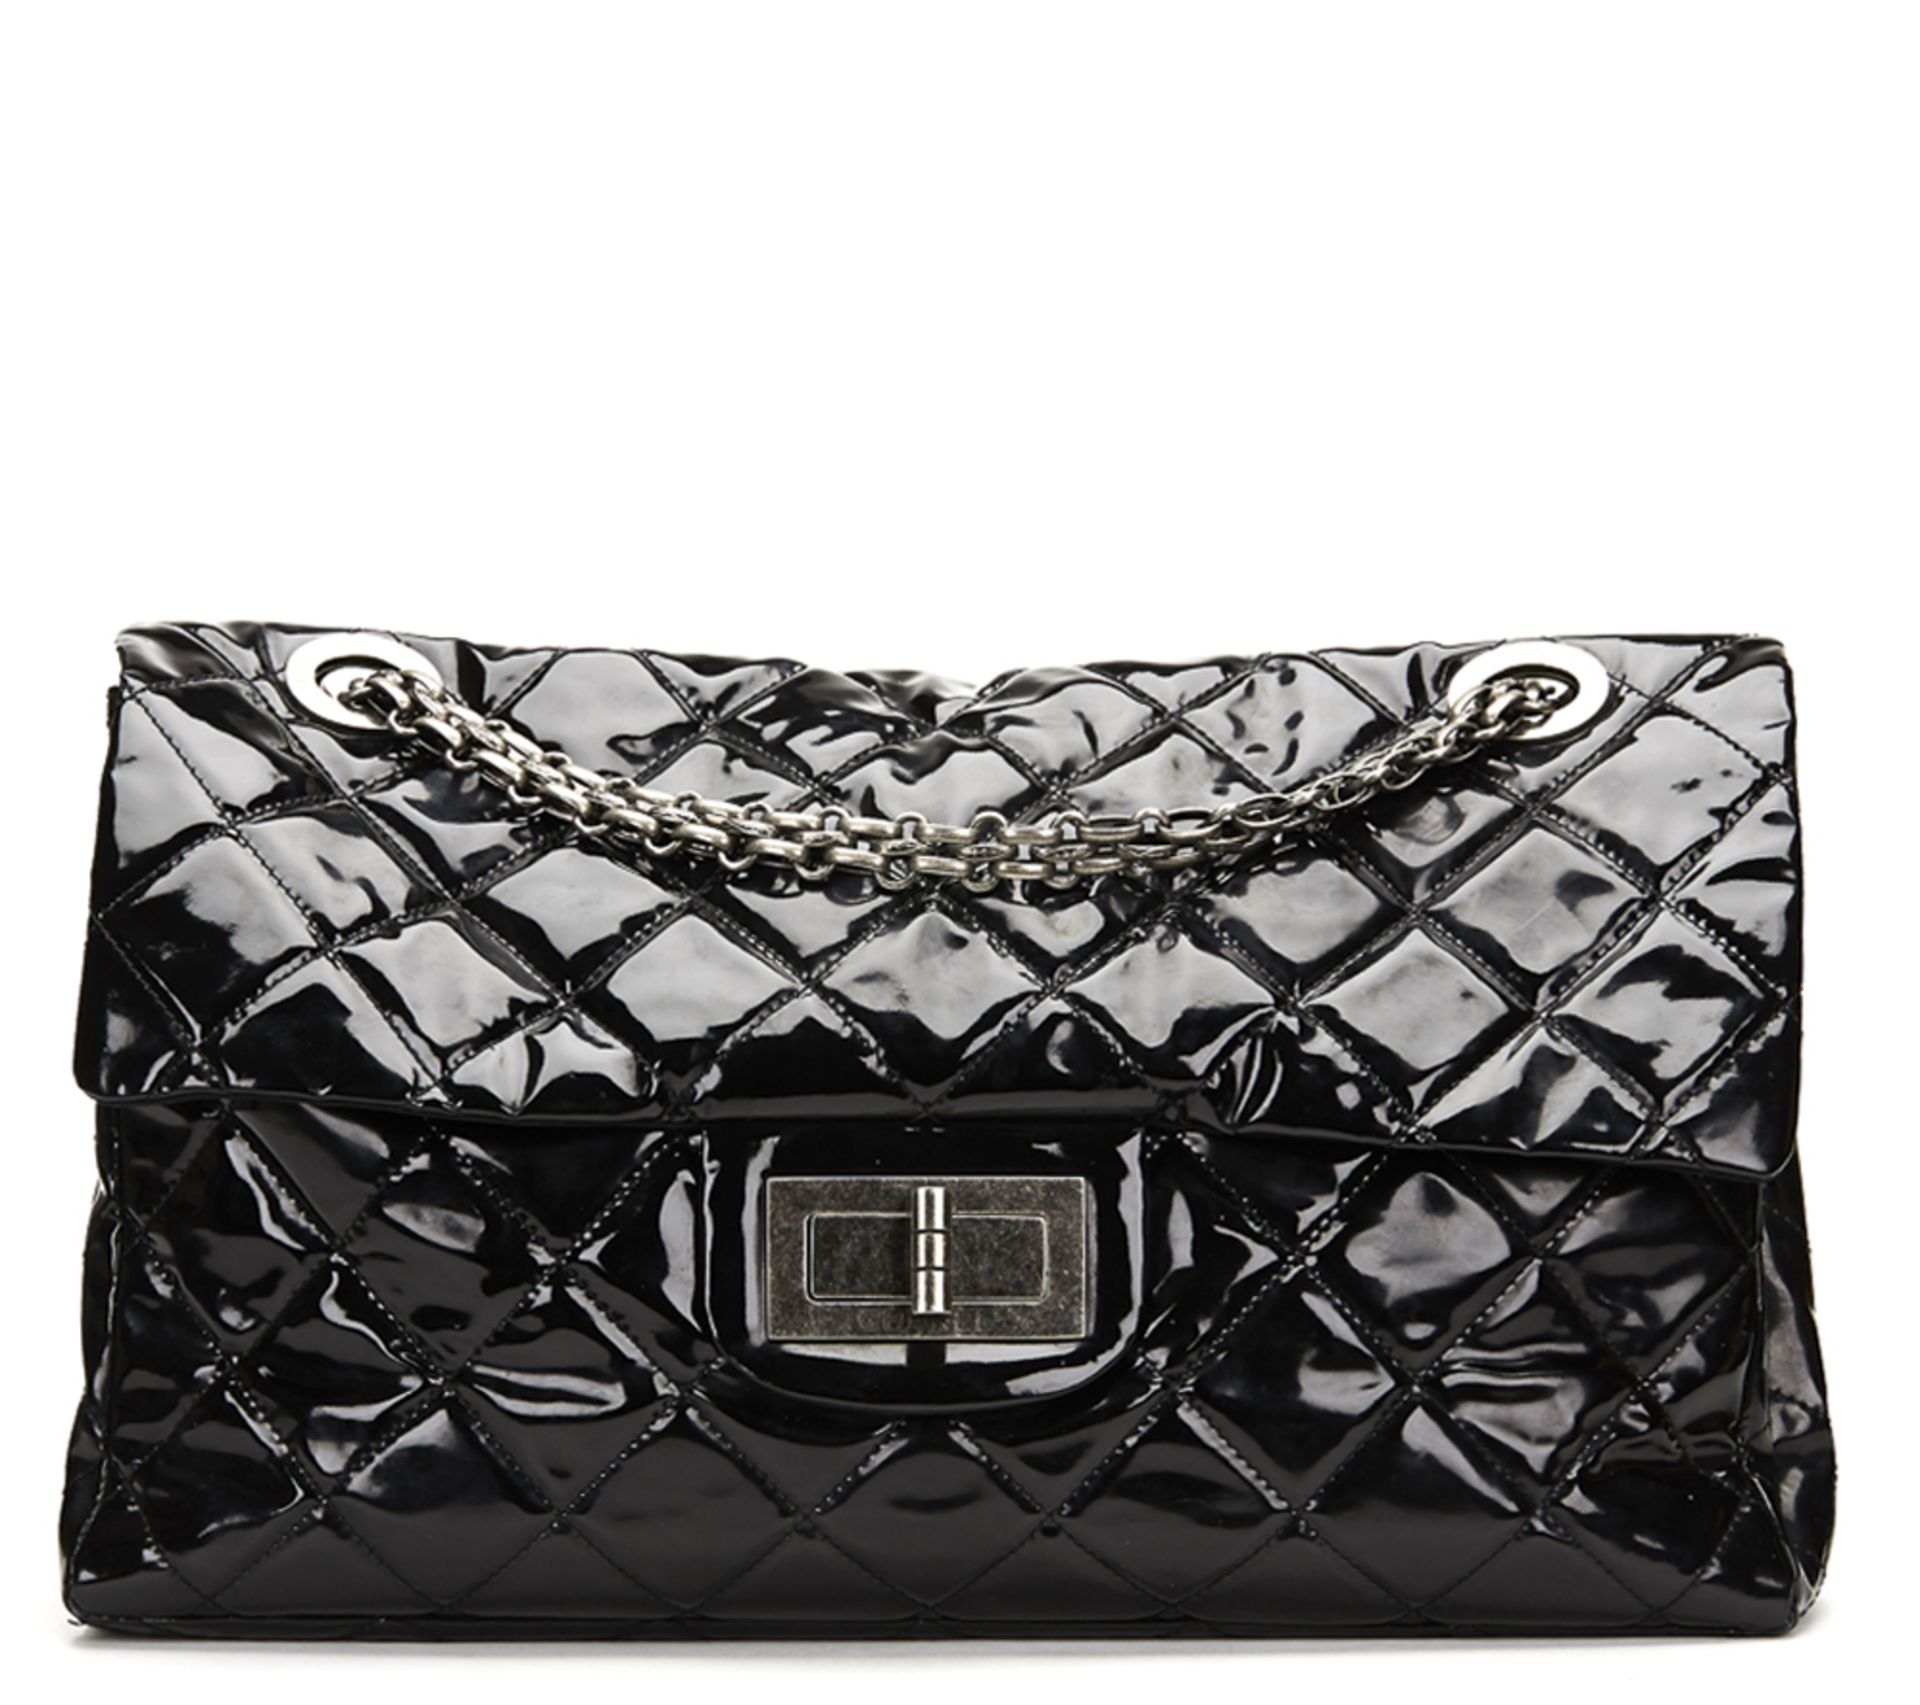 CHANEL Super Maxi 2.55 Reissue Flap Bag , - Black Quilted Patent Leather Super Maxi 2.55 Reissue